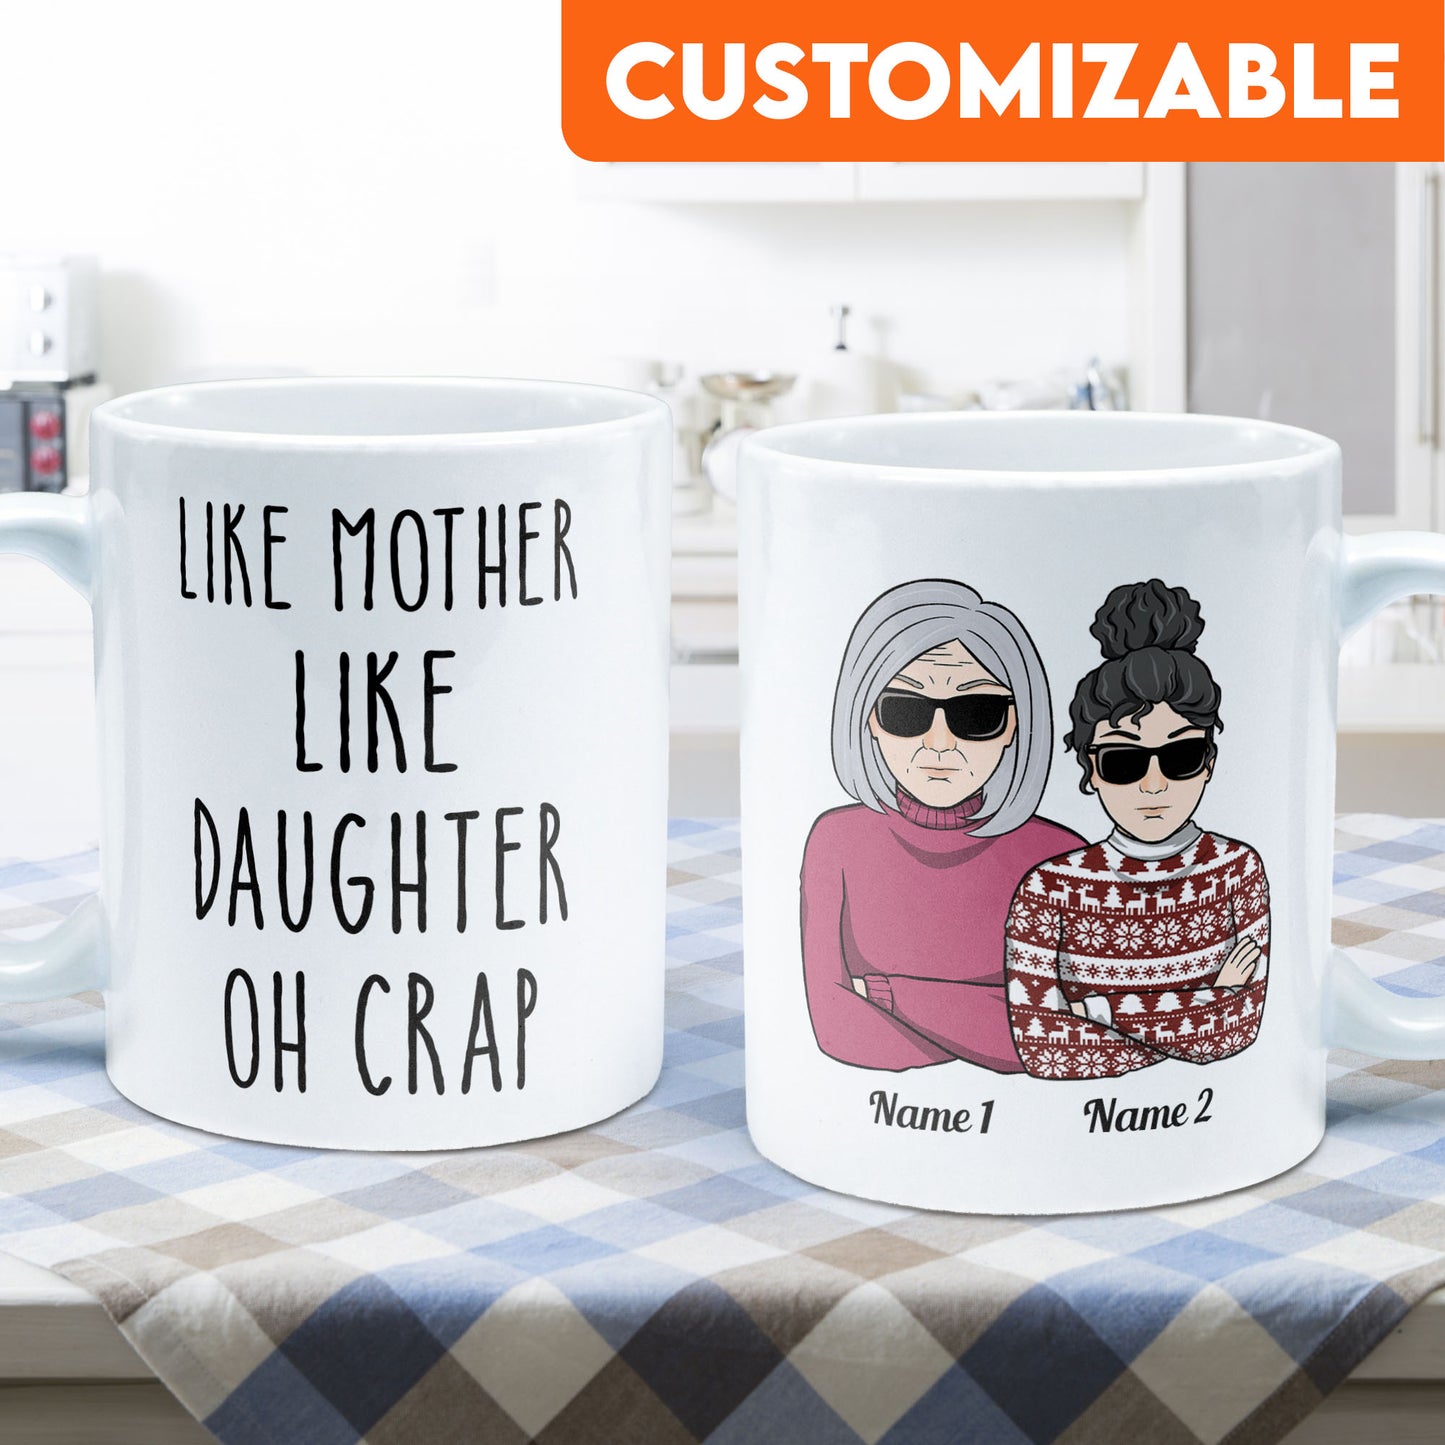 https://macorner.co/cdn/shop/products/Like-Father-Like-Daughter-Oh-Crap-Personalized-Mug-Christmas-Gift-For-Fathers_-Mothers_-Grandpas_-Grandmas_-Sons-_-Daughters_7_7fa413c2-d5a2-4021-a646-e23f7876224d.jpg?v=1636361984&width=1445